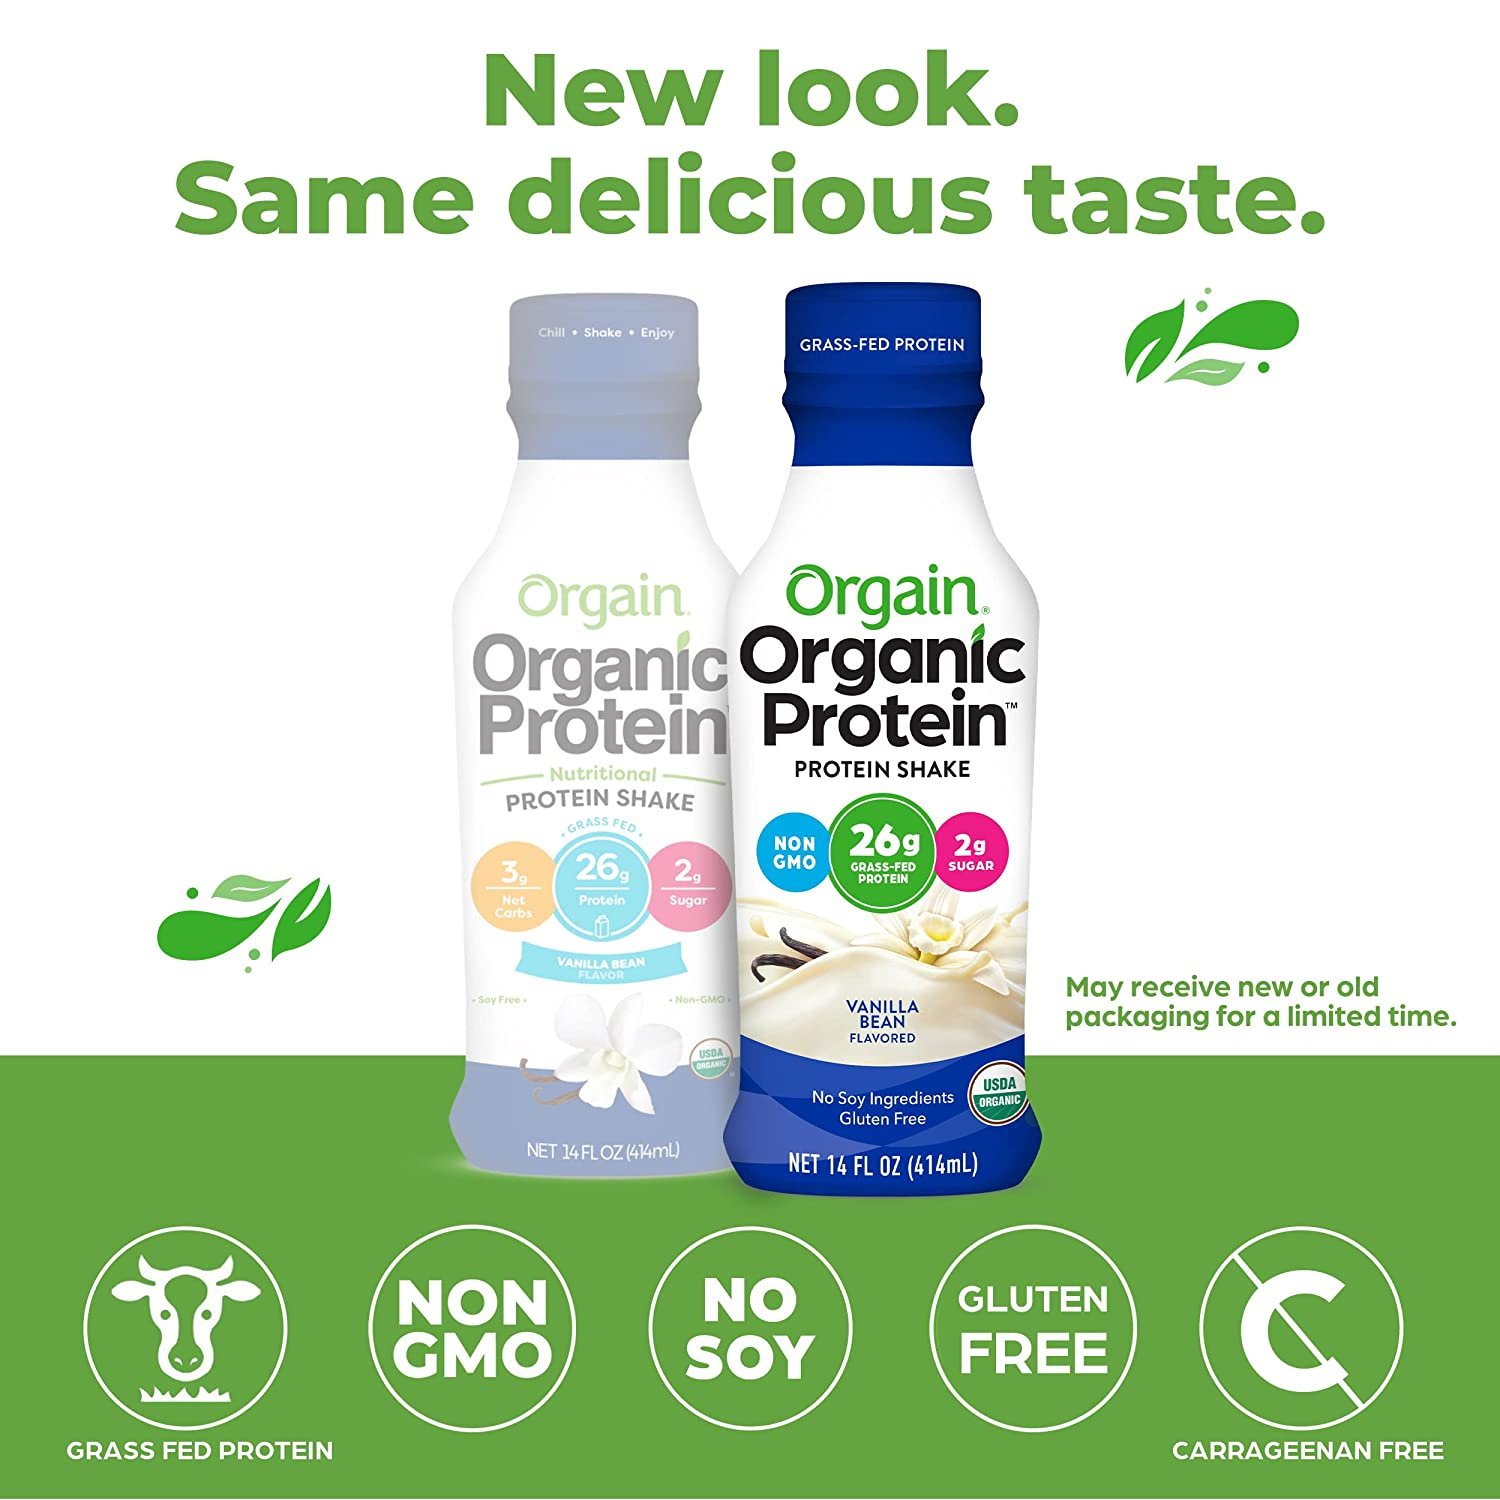 Orgain Organic 26G Grass Fed Whey Protein Shake, Vanilla Bean - Meal Replacement, Ready to Drink, Low Net Carbs, No Sugar Added, Gluten Free, Non-Gmo, 14 Fl Oz (Pack of 12) (Packaging May Vary)